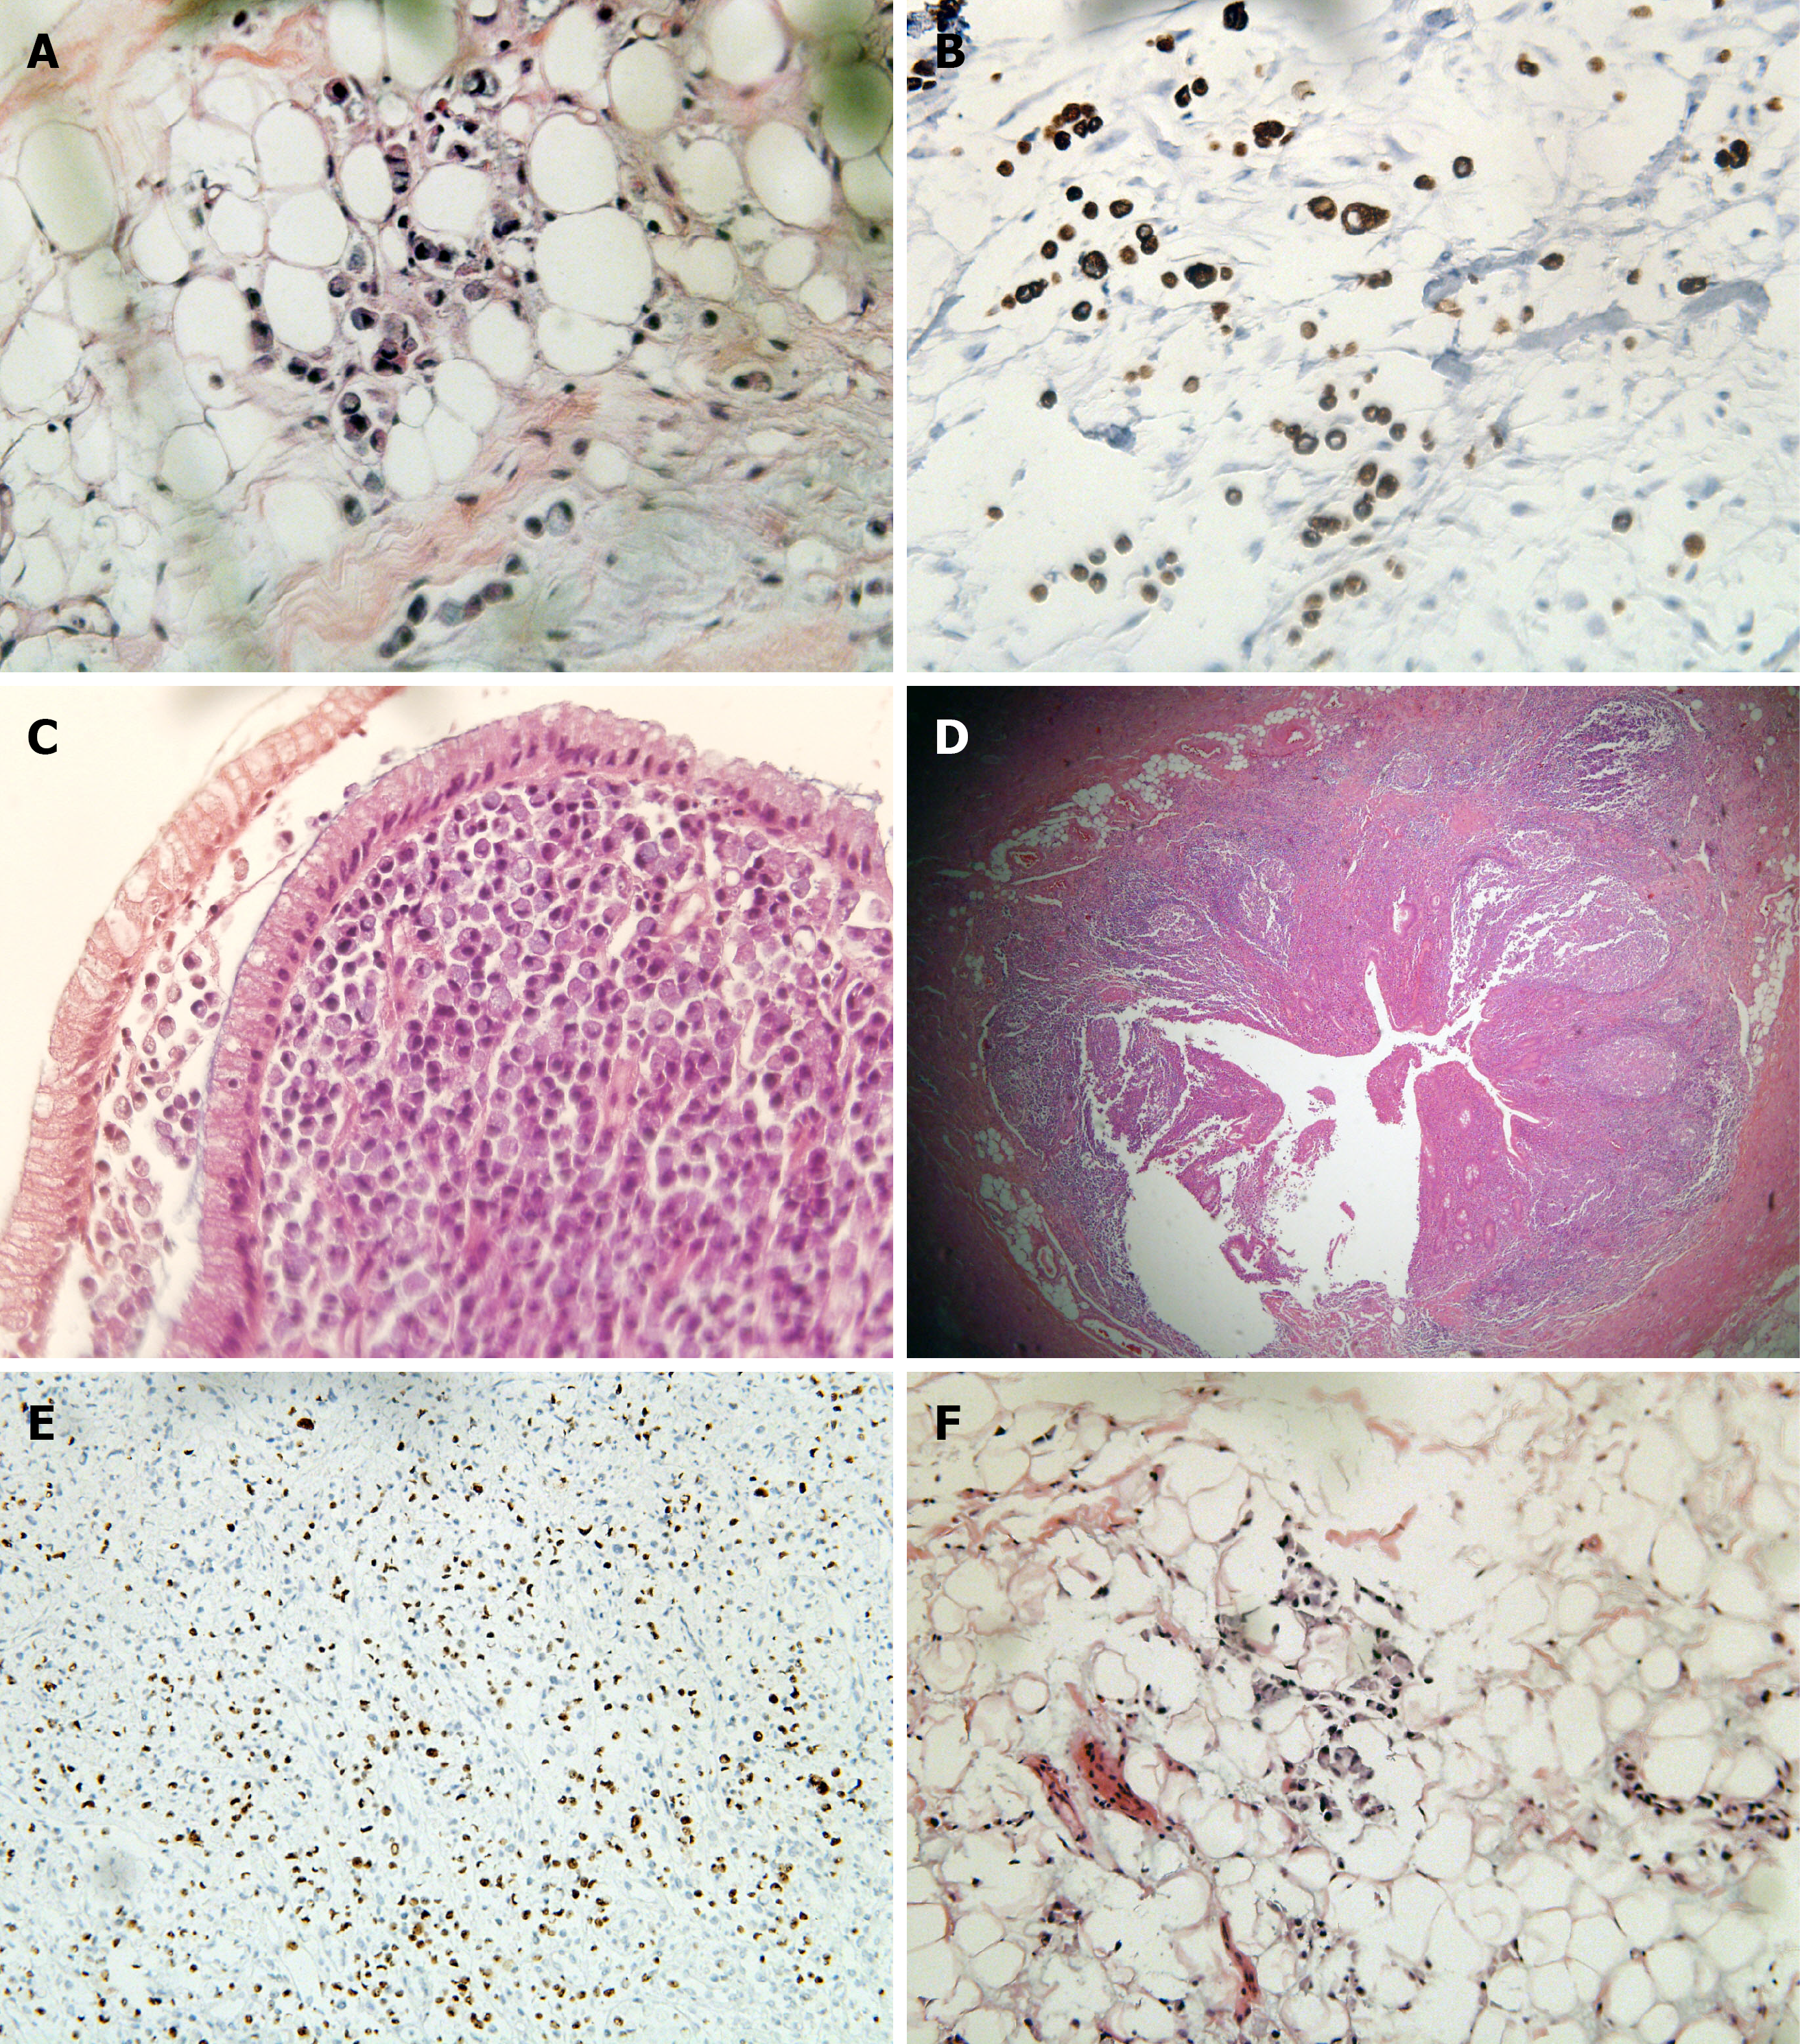 PDF) Signet Ring Carcinoma of the Appendix Presenting as Crohn's Disease in  a Young Male